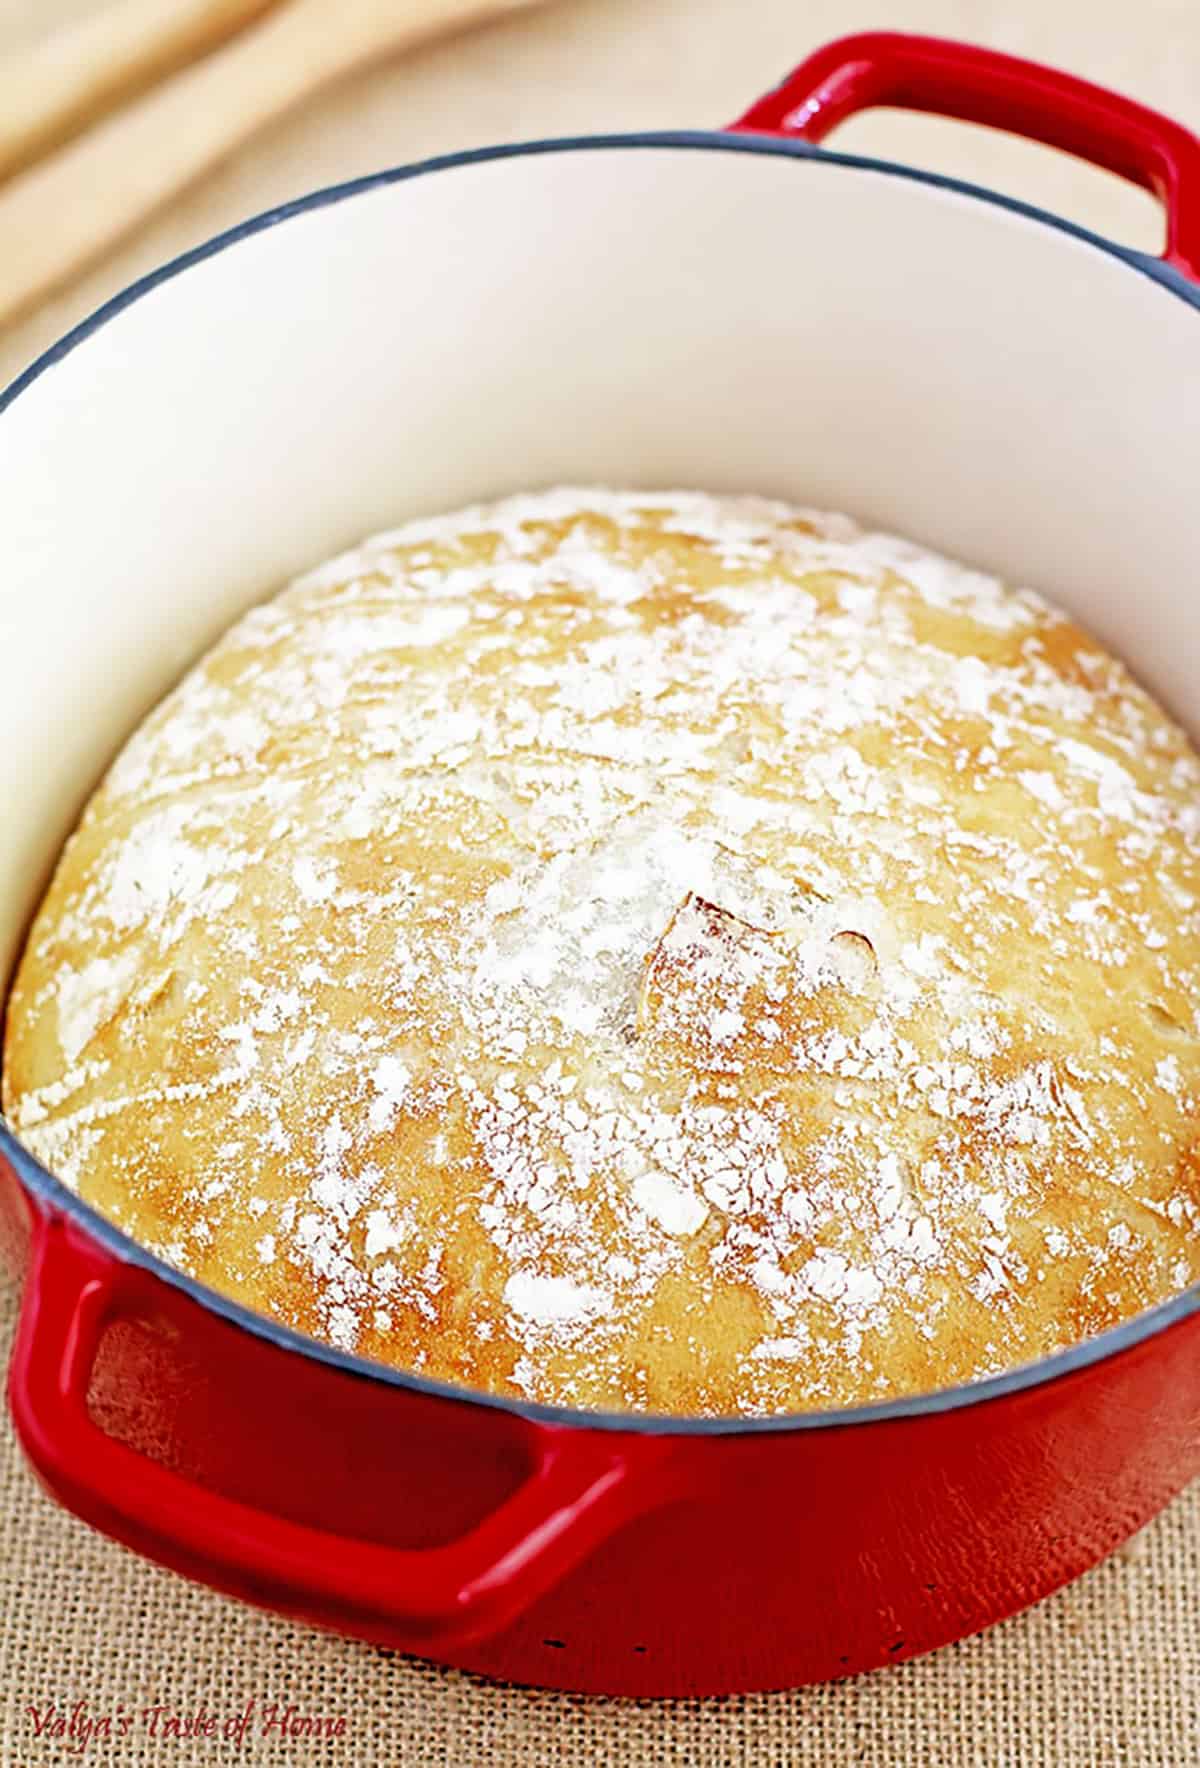 Dutch Oven Bread 101 - Bake from Scratch